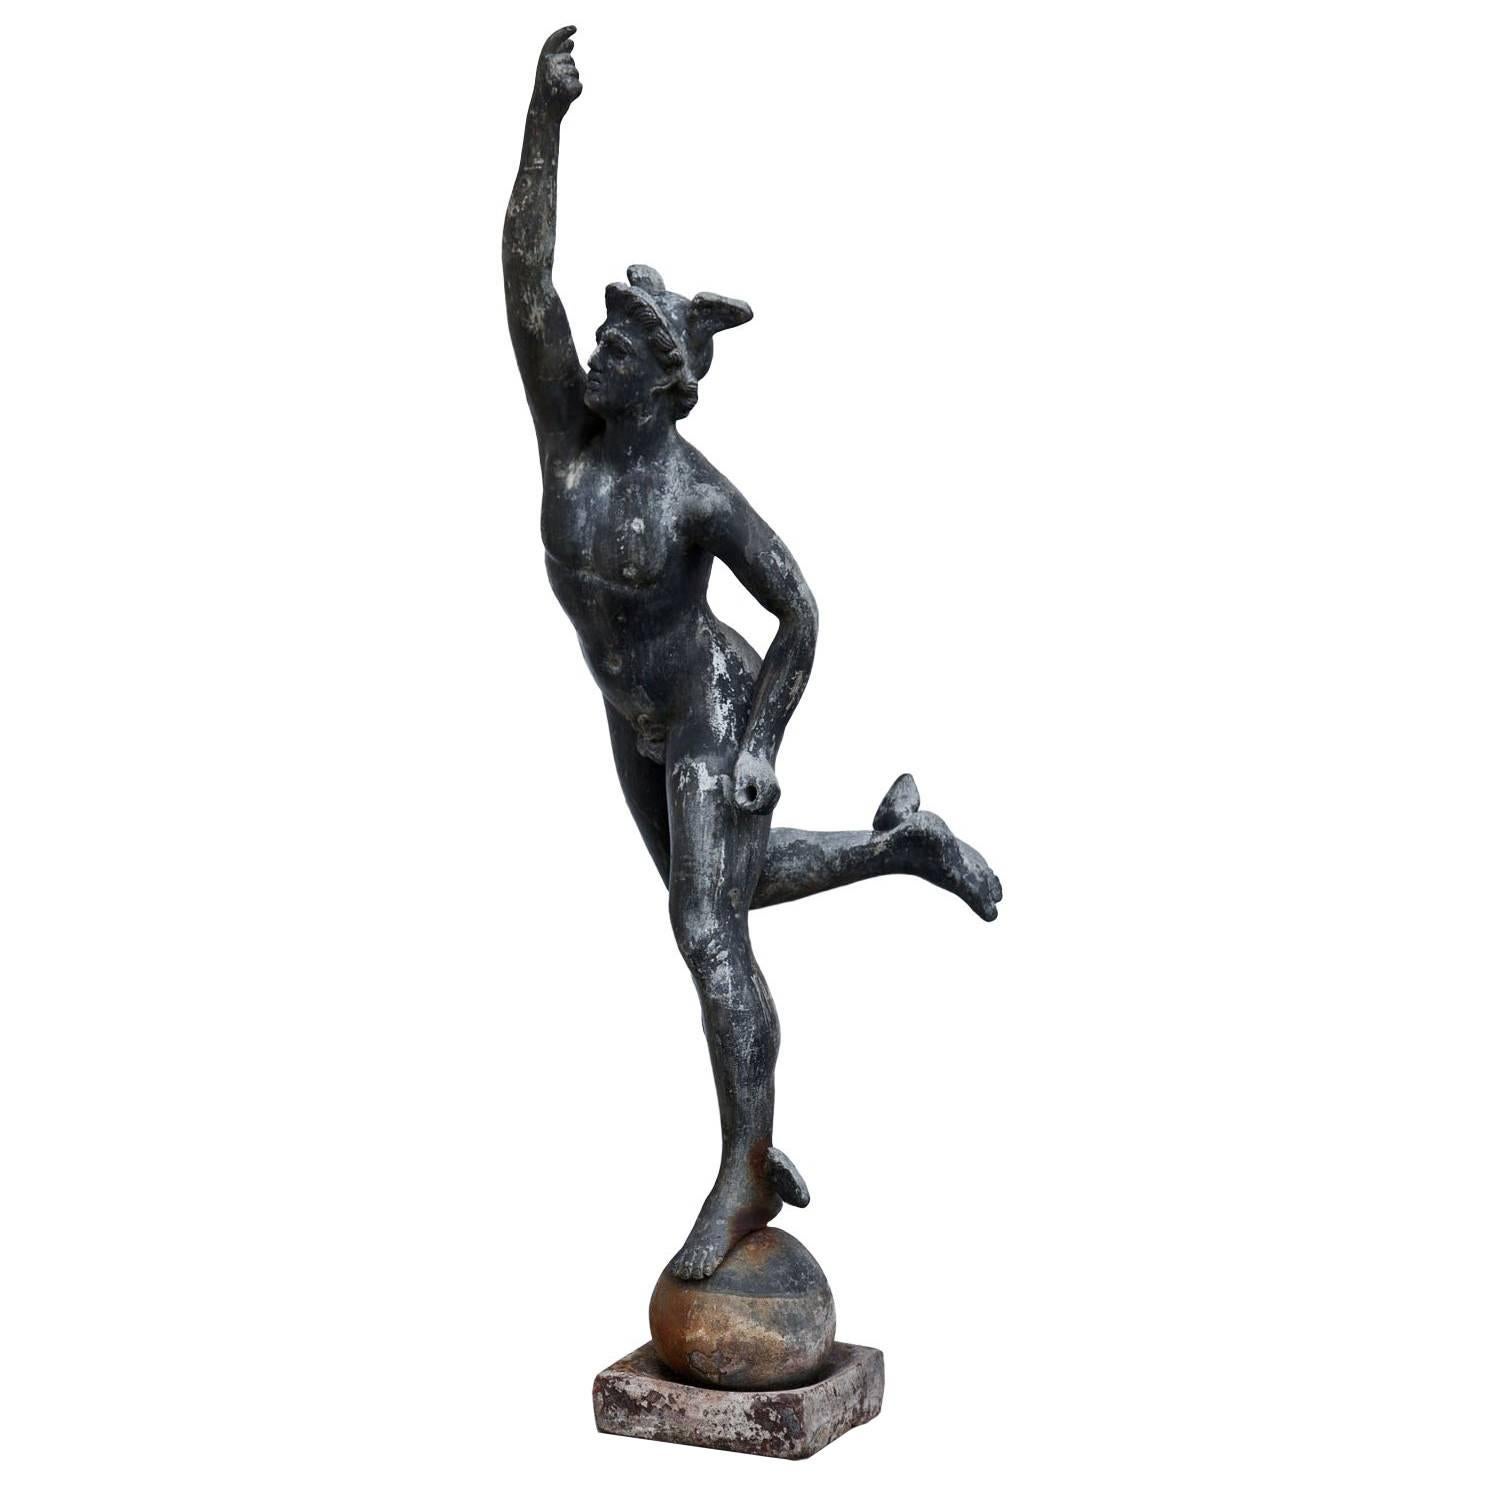 Hermes after Giambologna, Probably England, 19th Century